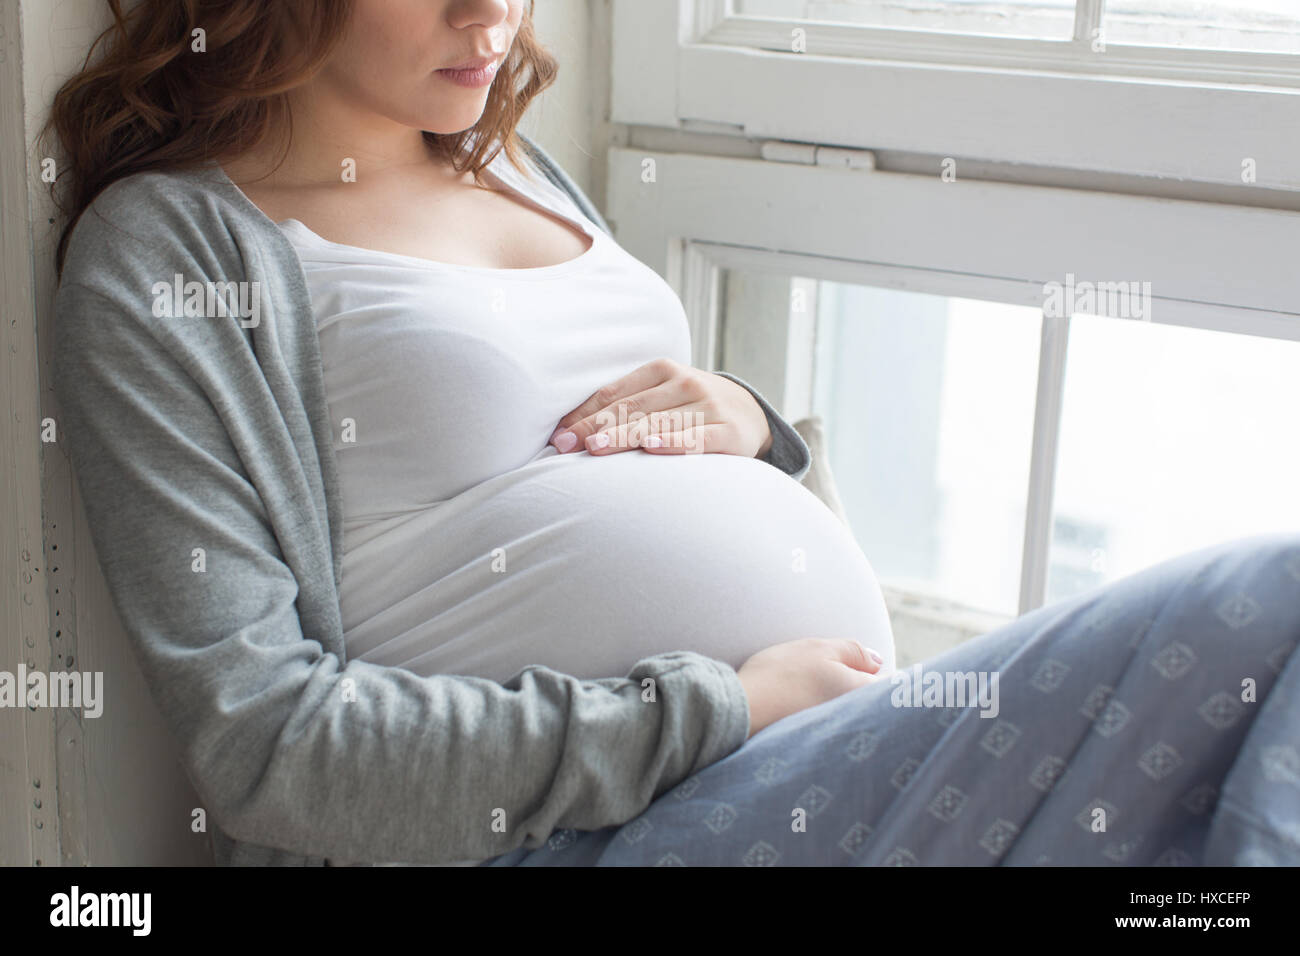 Pregnant female's belly on the windowsill Stock Photo